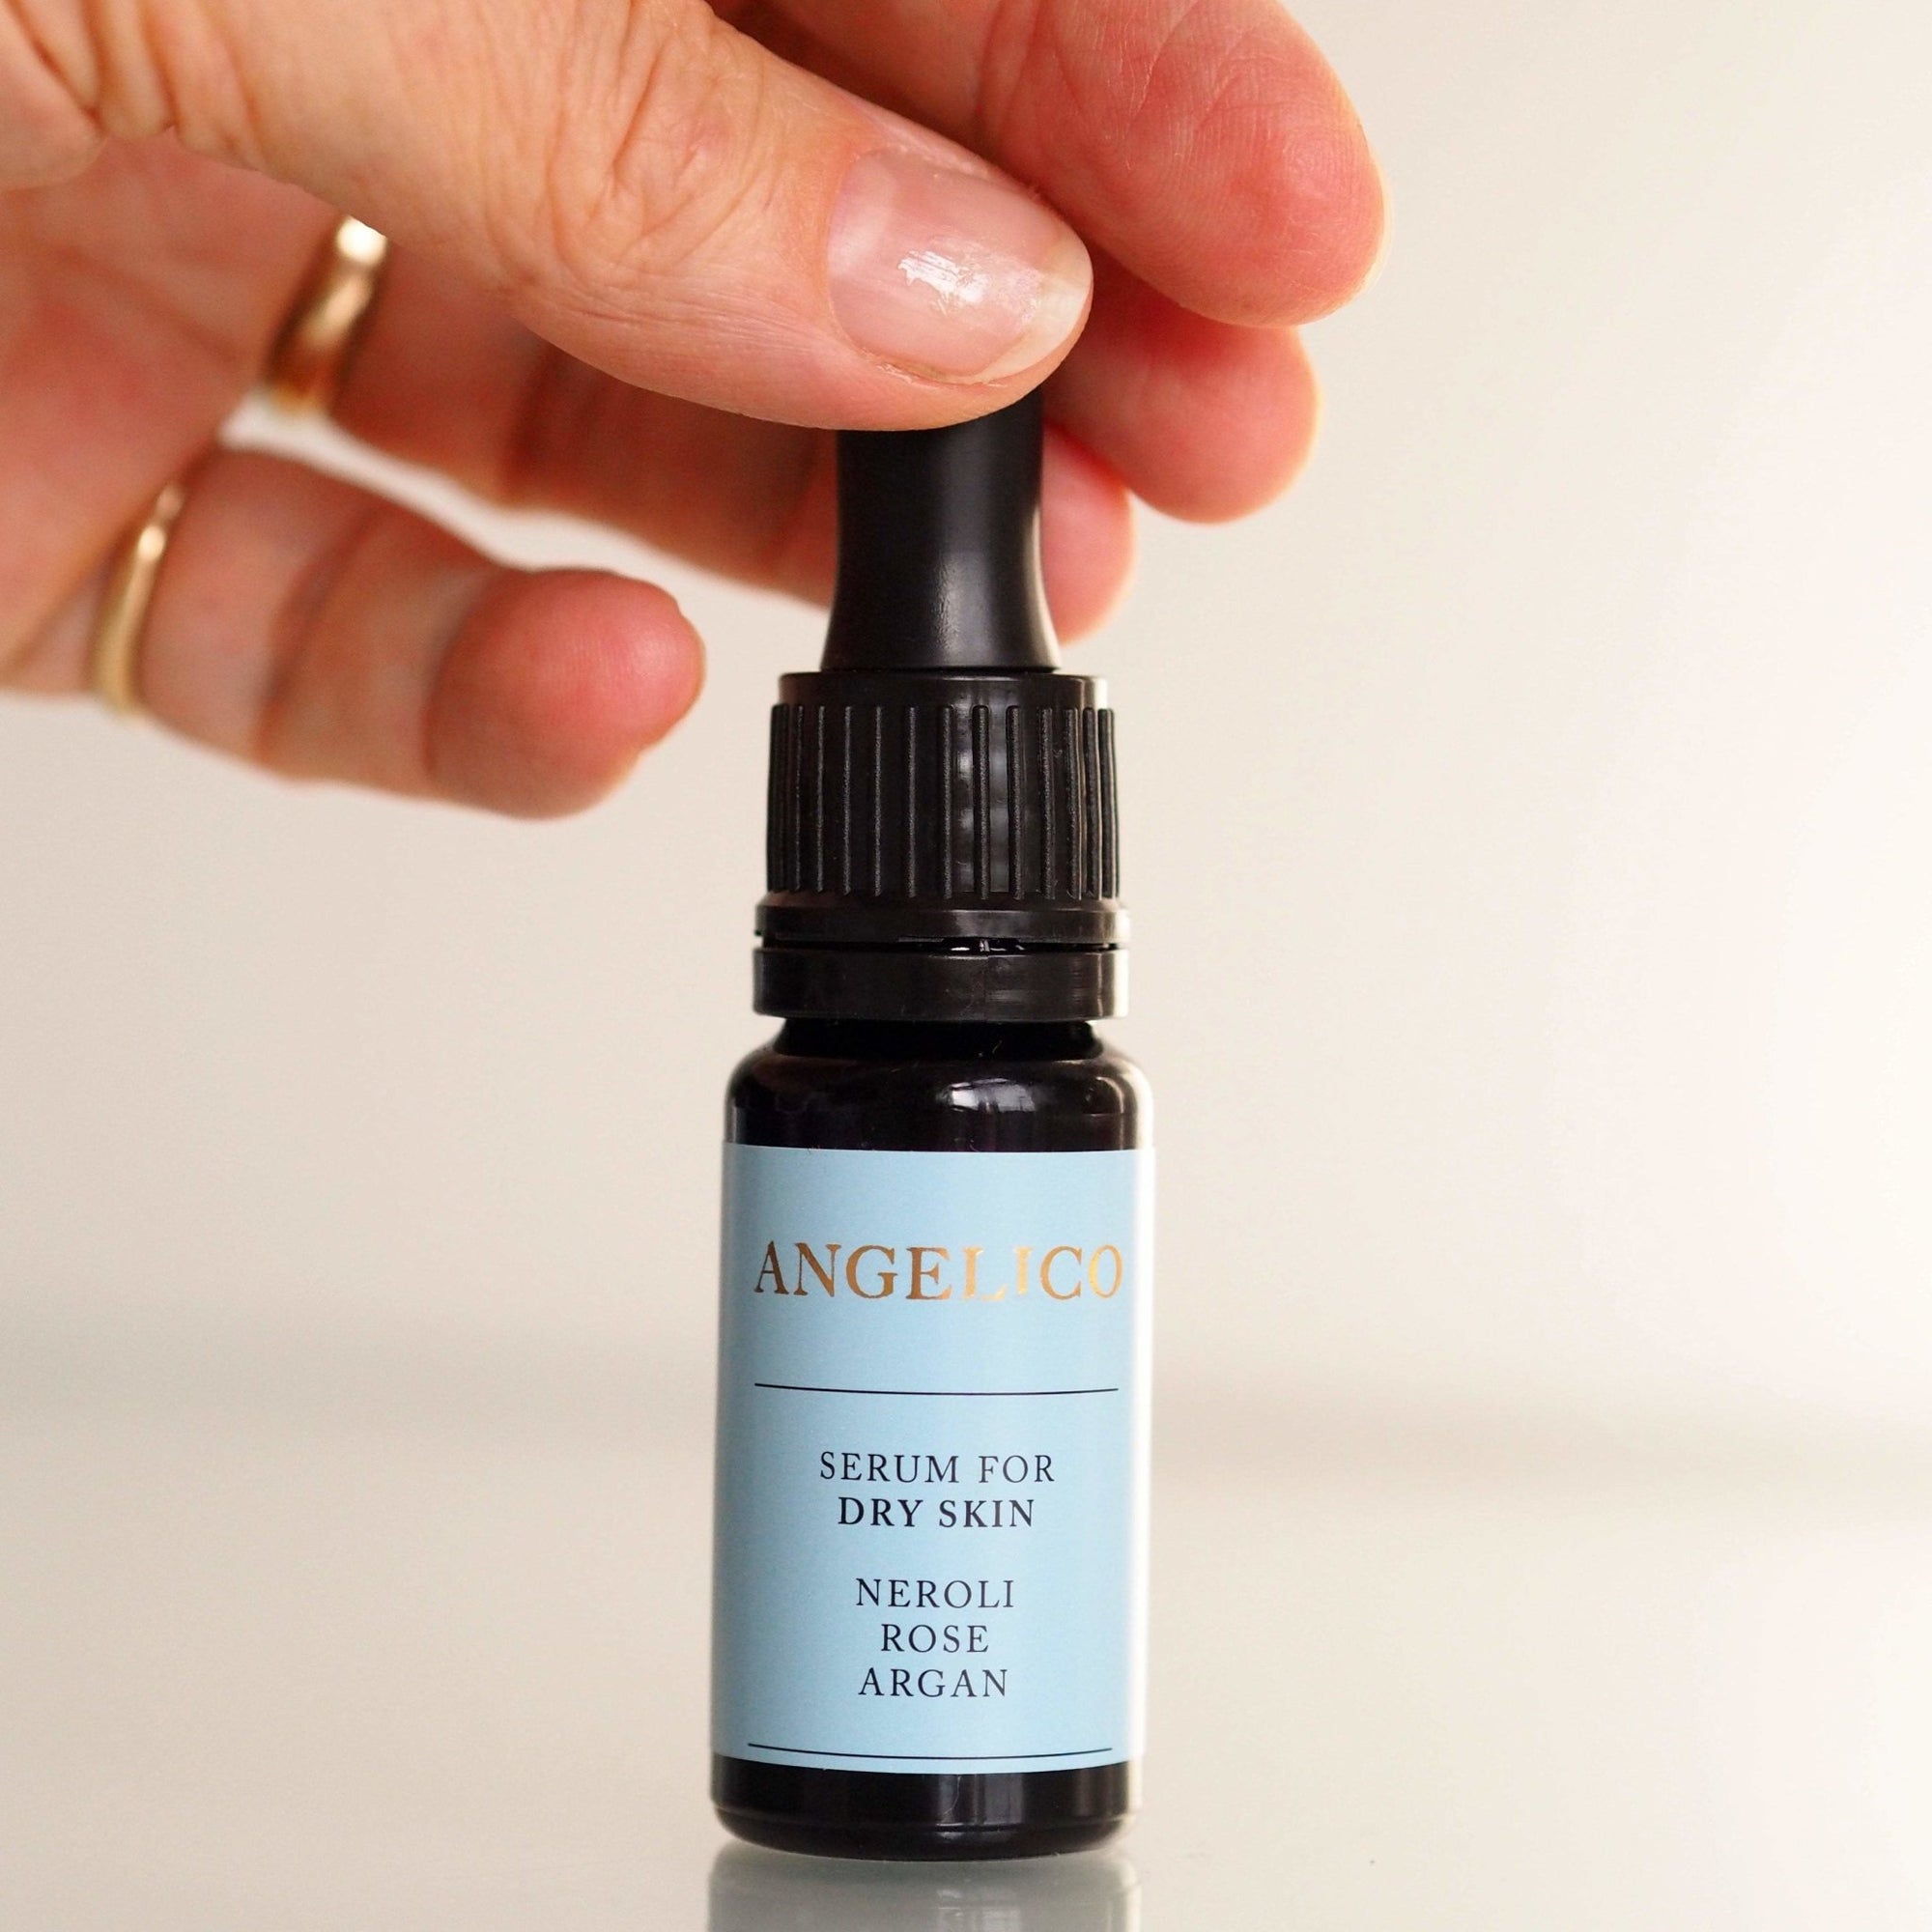 Serum for Dry Skin - Angelico.London